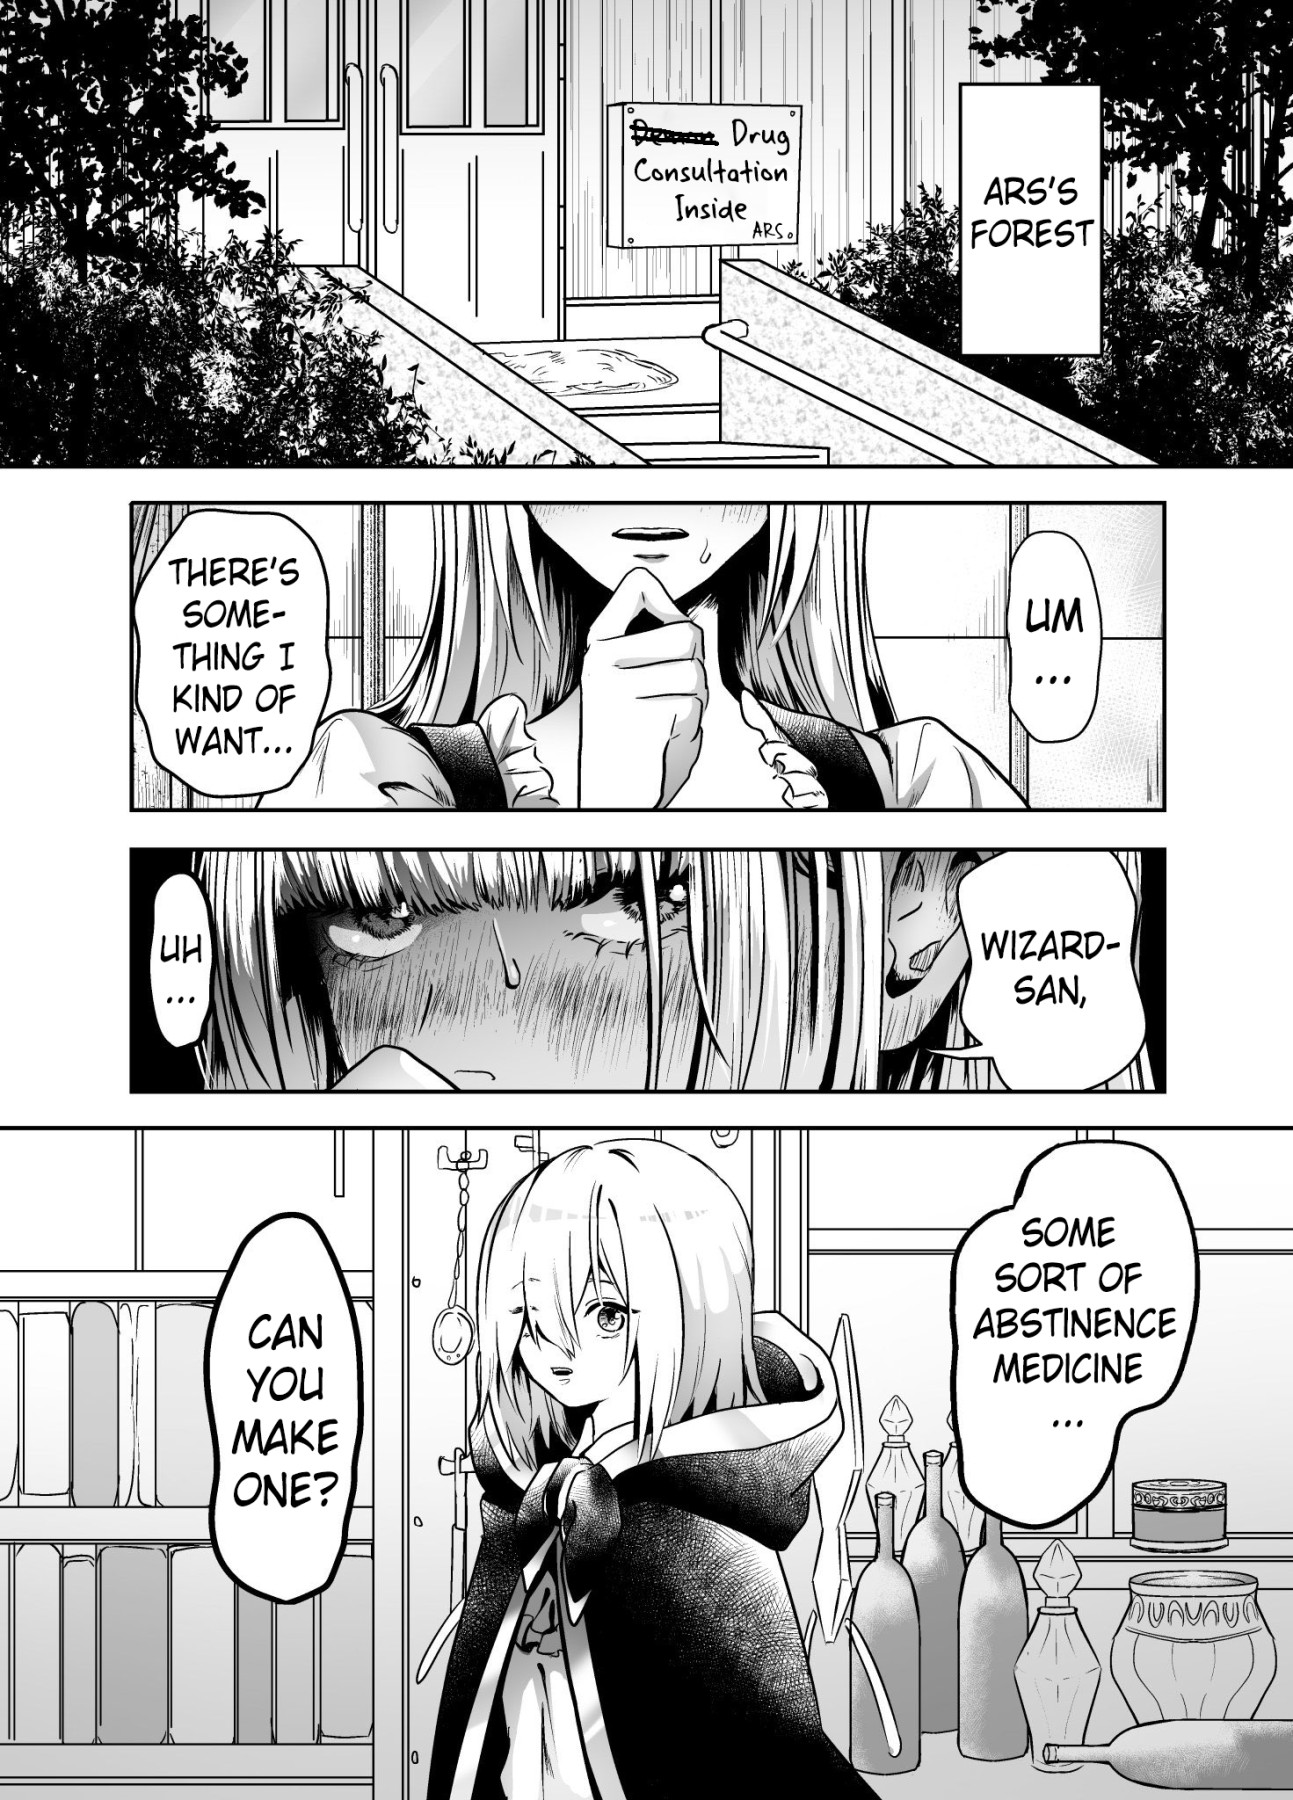 Hentai Manga Comic-The Story of Ars Making an Abstinence Drug for a Villager-Read-3